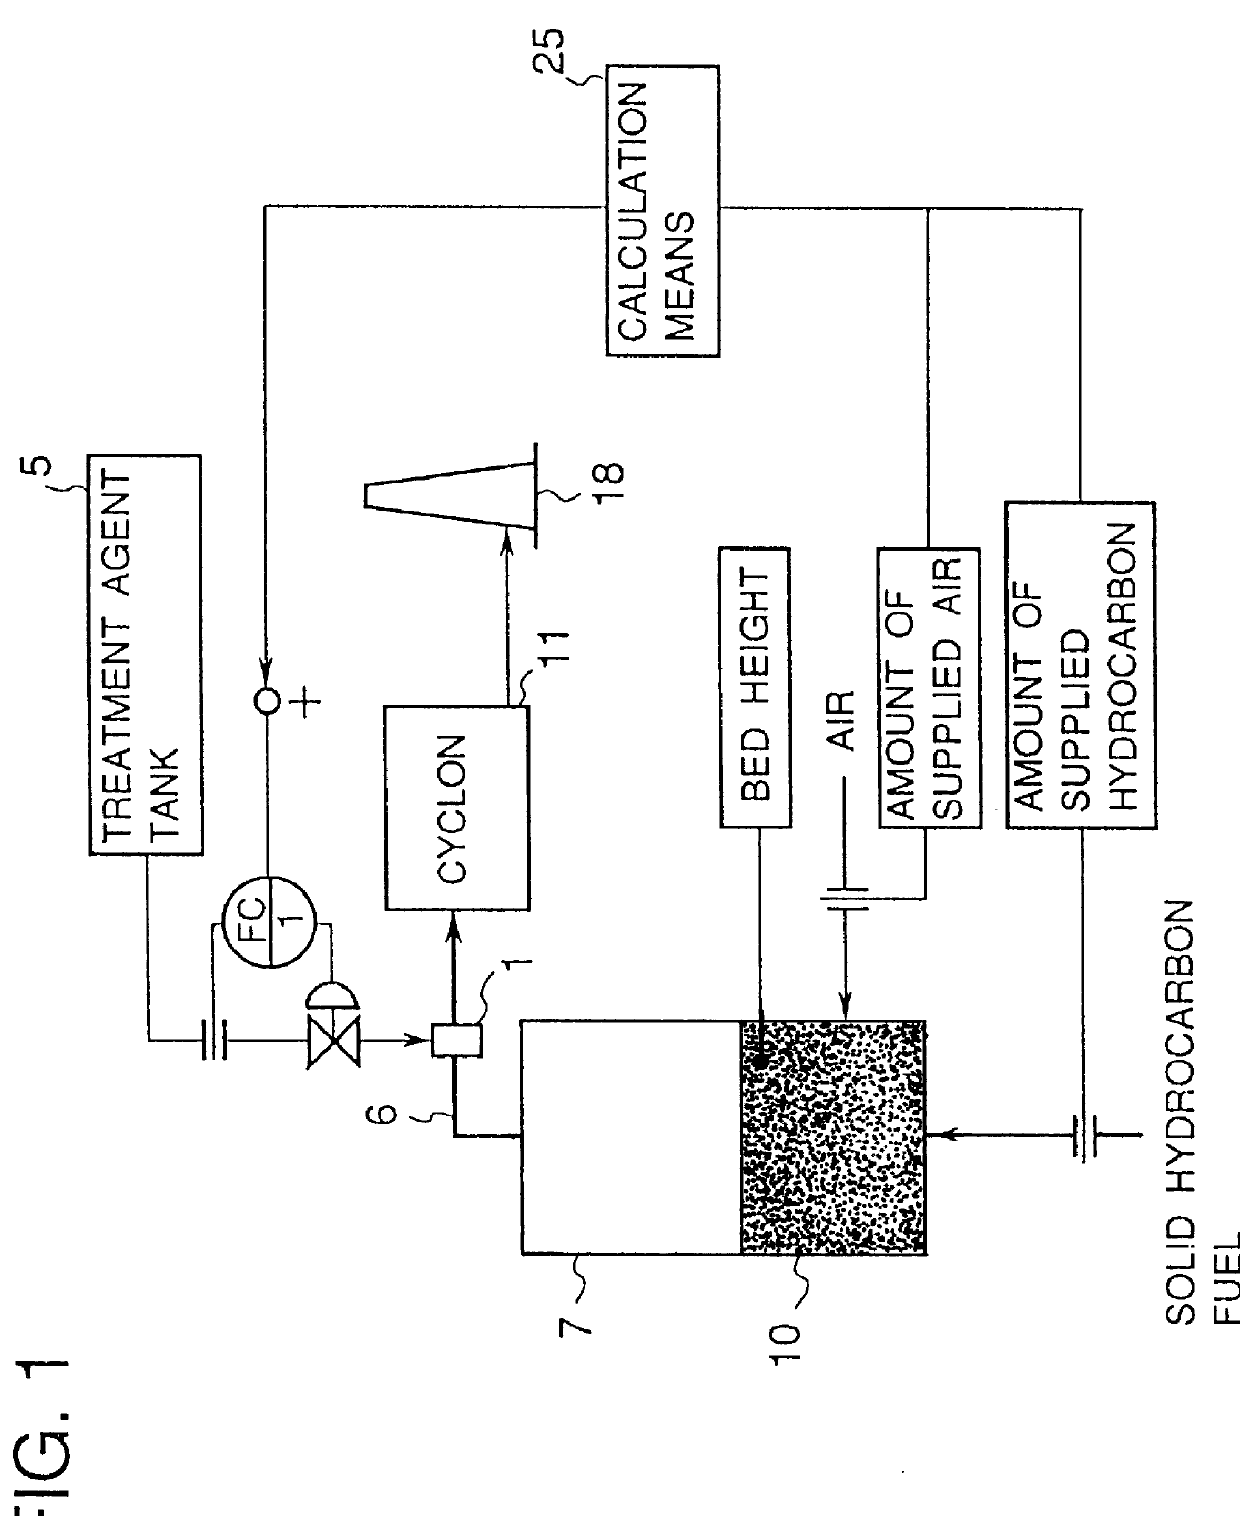 Method of predicting and controlling harmful oxide and apparatus therefor